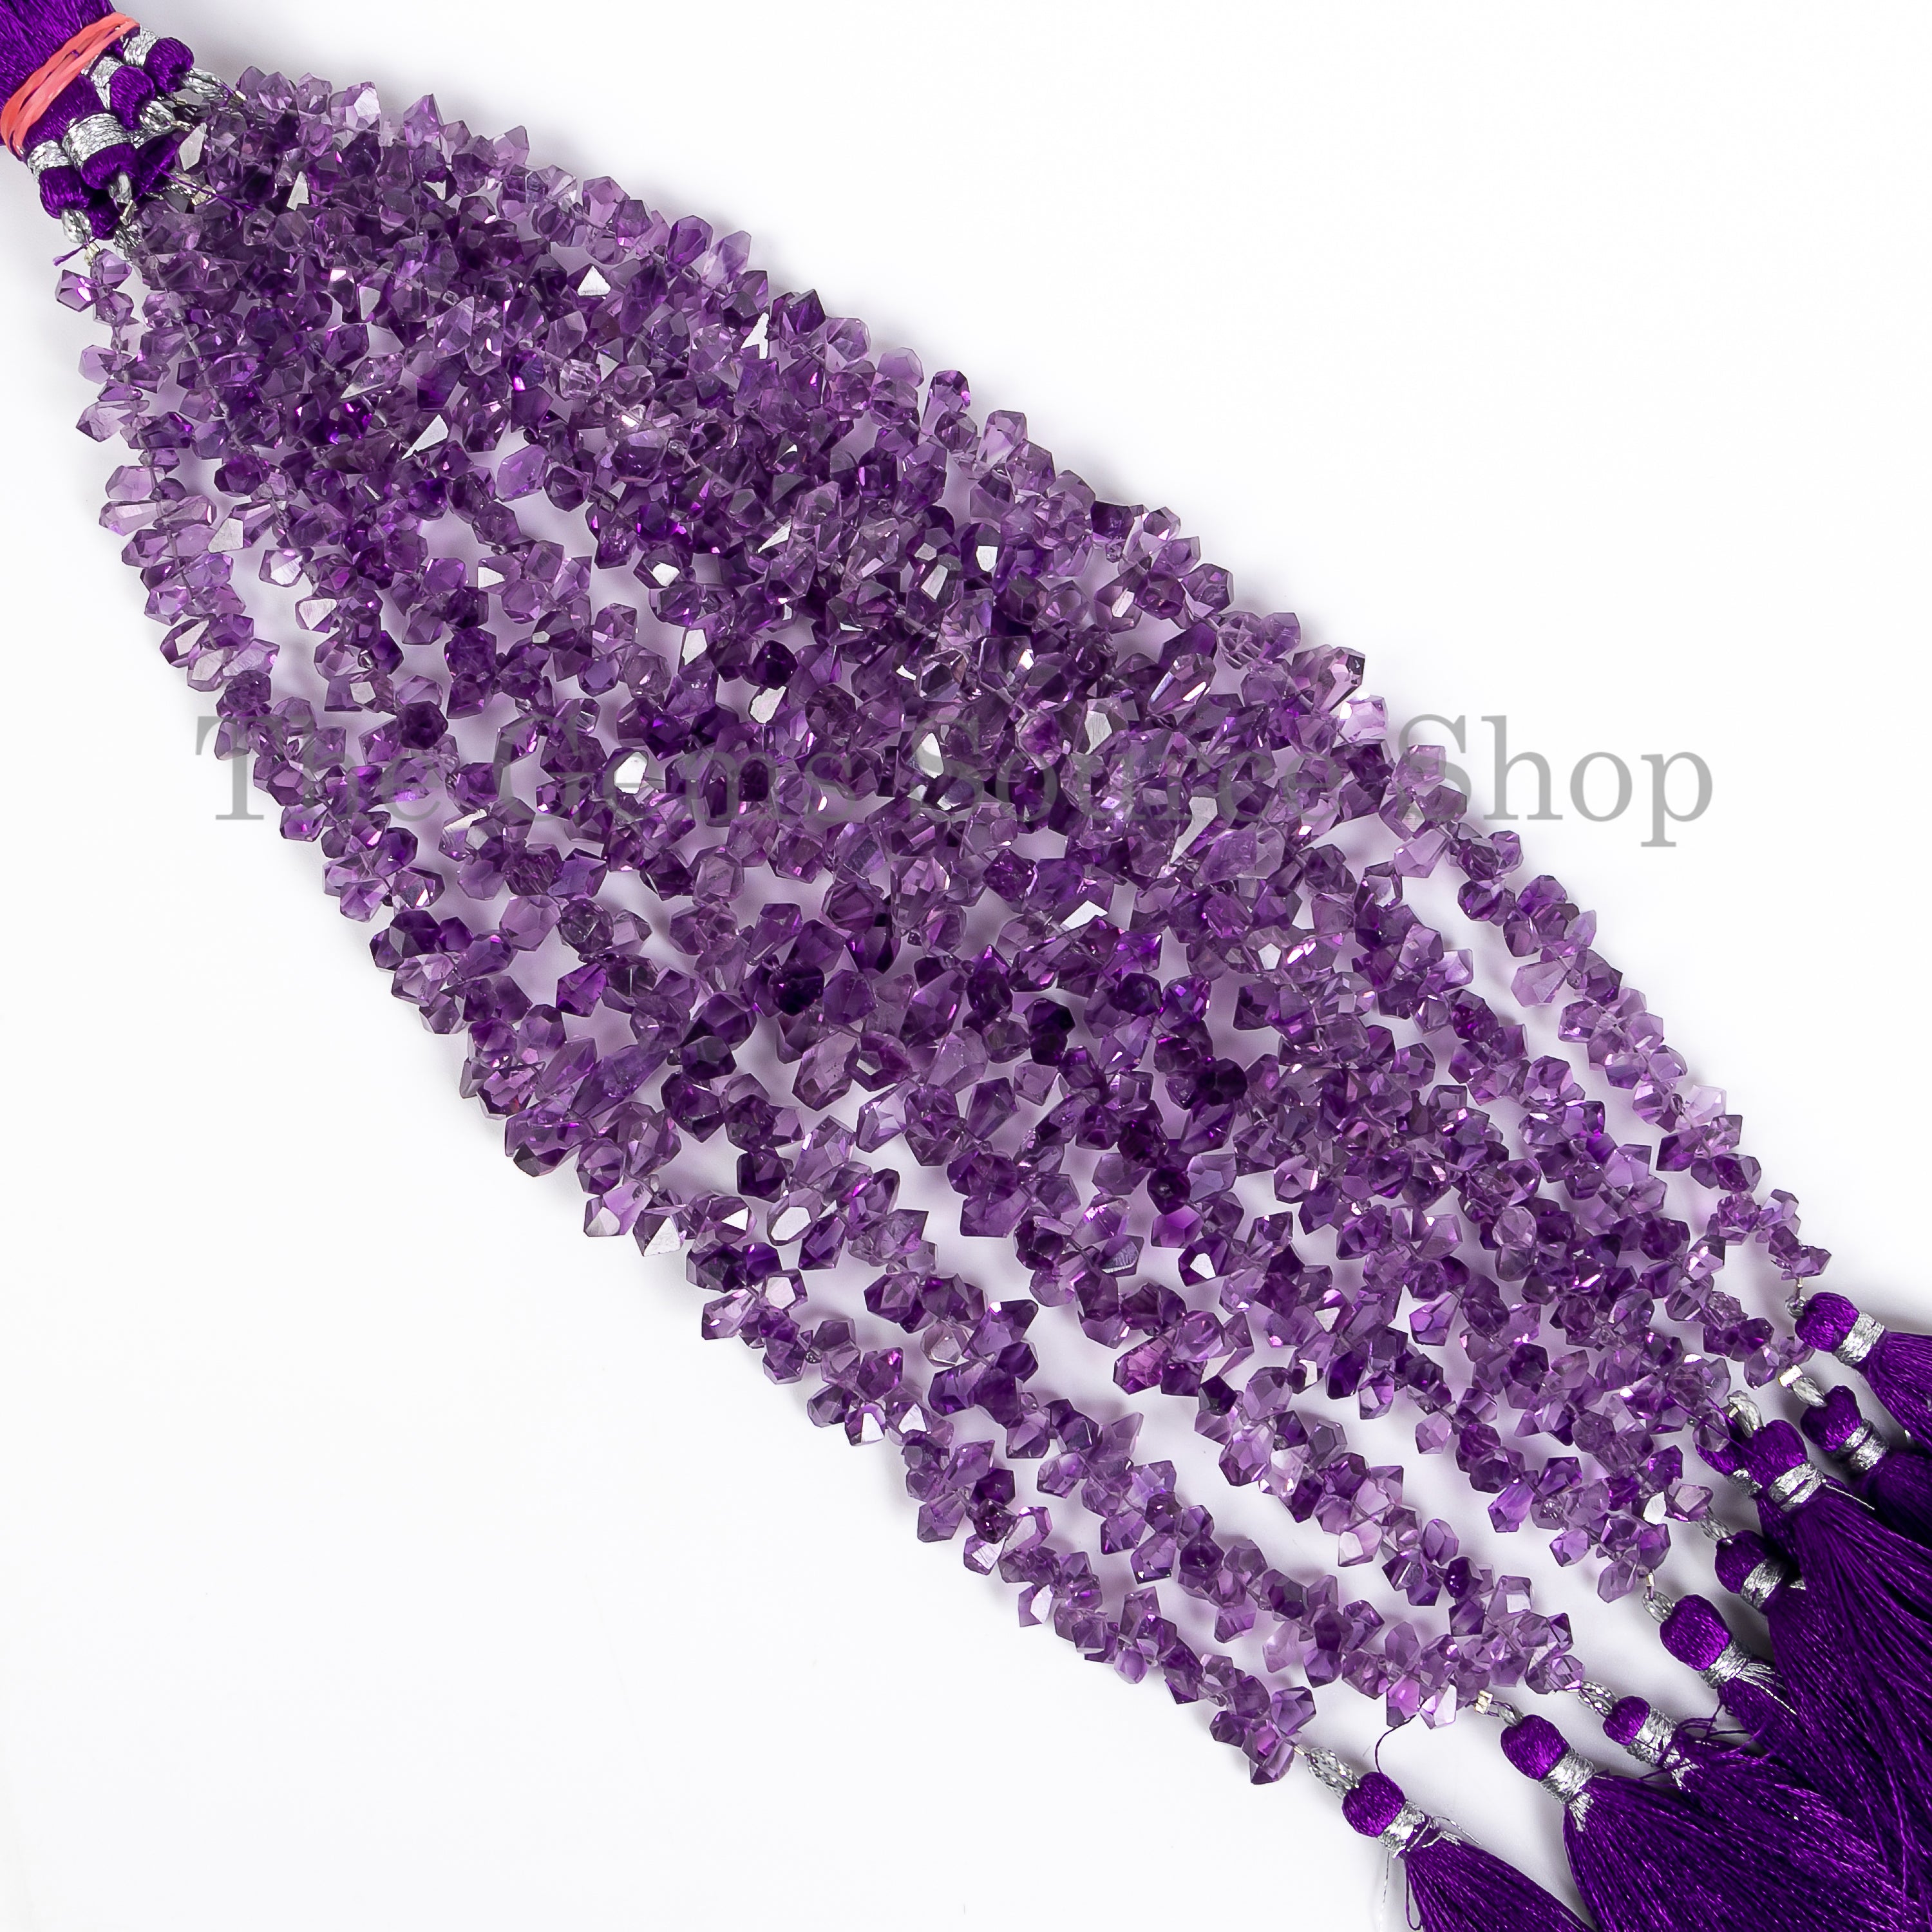 Amethyst Faceted Tumble Drops Gemstone Beads TGS-4921